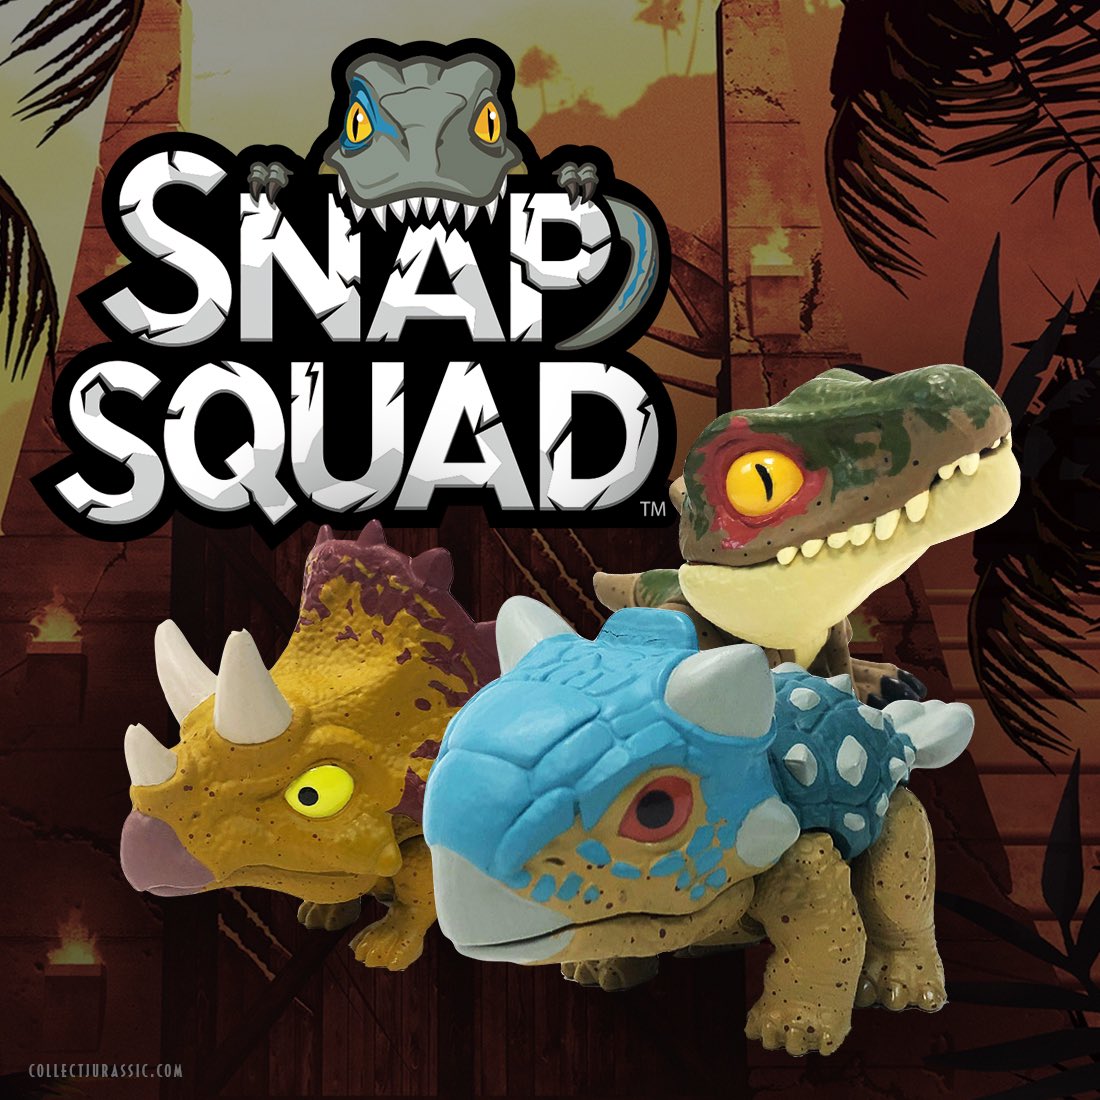 Collect Jurassic Oh Snap Jurassic World Snap Squad Figures Should Be Making Their Way Into More Us Stores Including Target Later This Fall As Part Of The Camp Cretaceous These